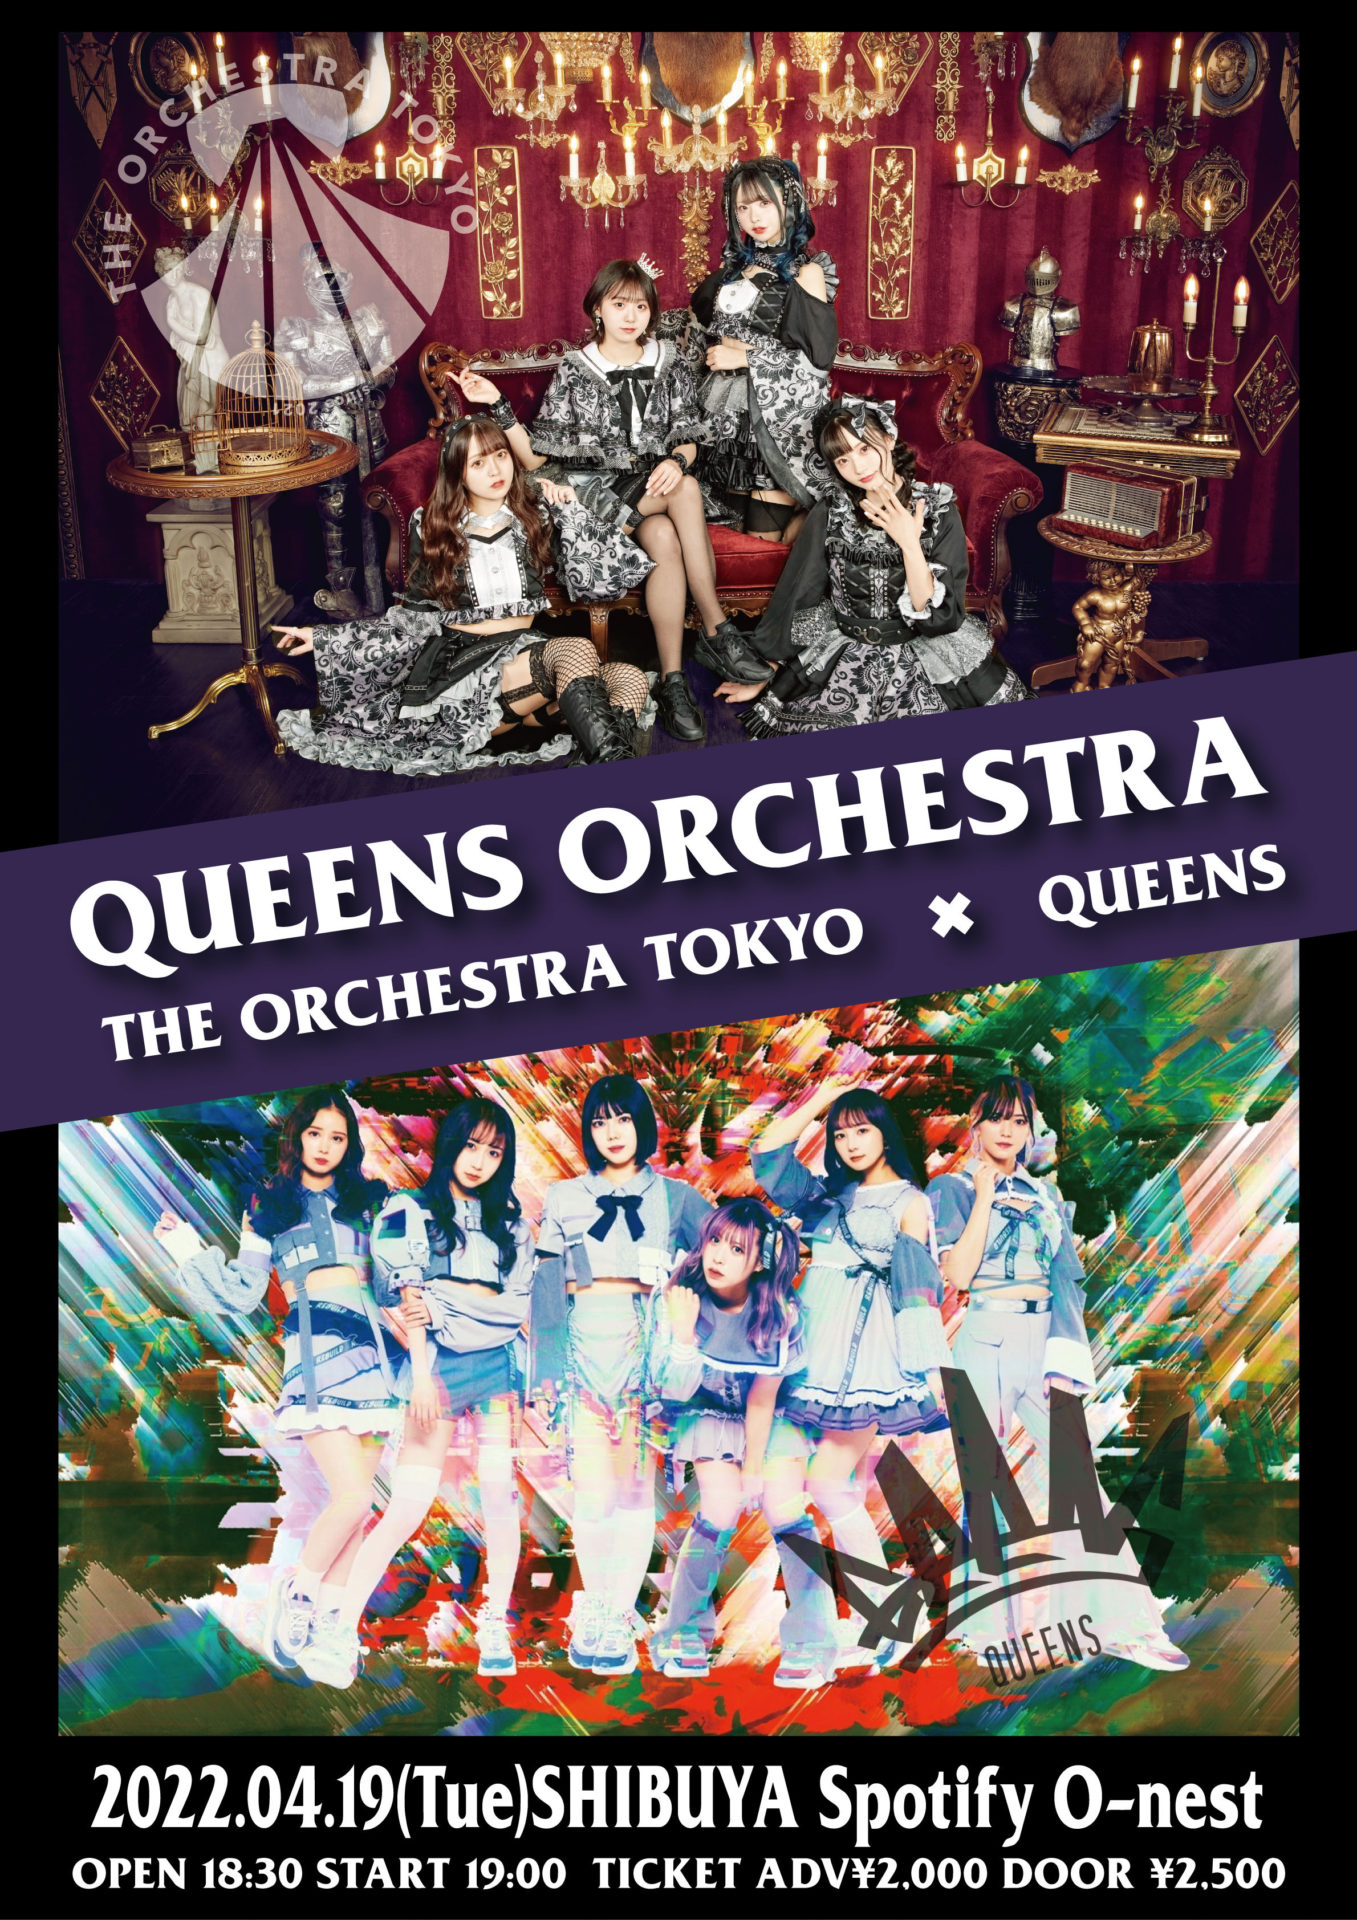 THE ORCHESTRA TOKYO×QUEENS 2MAN SHOW『QUEENS ORCHESTRA』